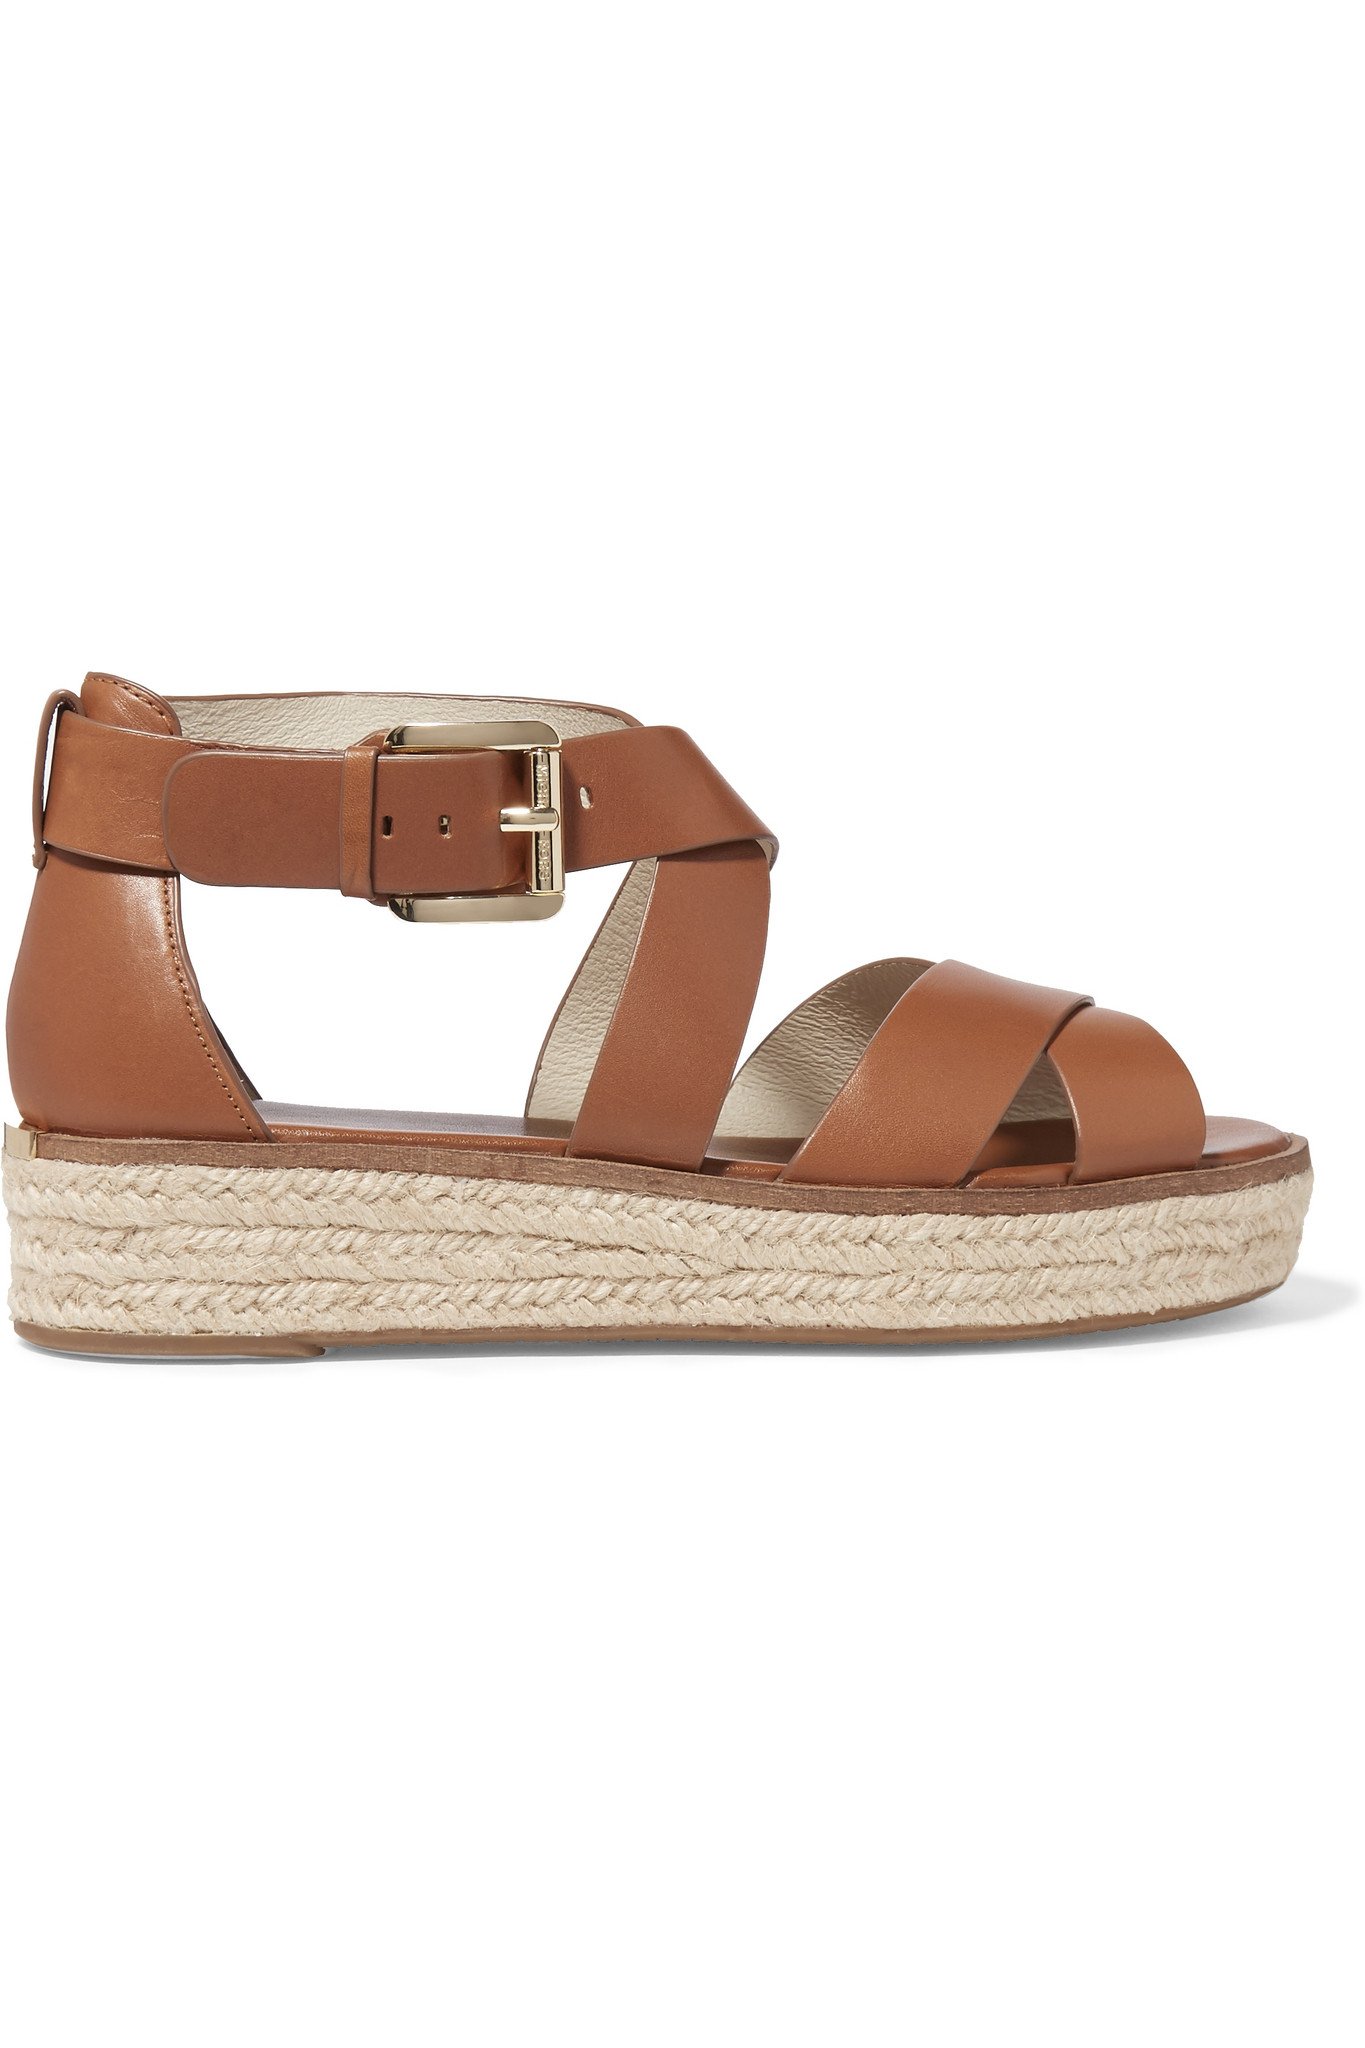 michael kors darby brown sandals discount sandals - Marwood ...